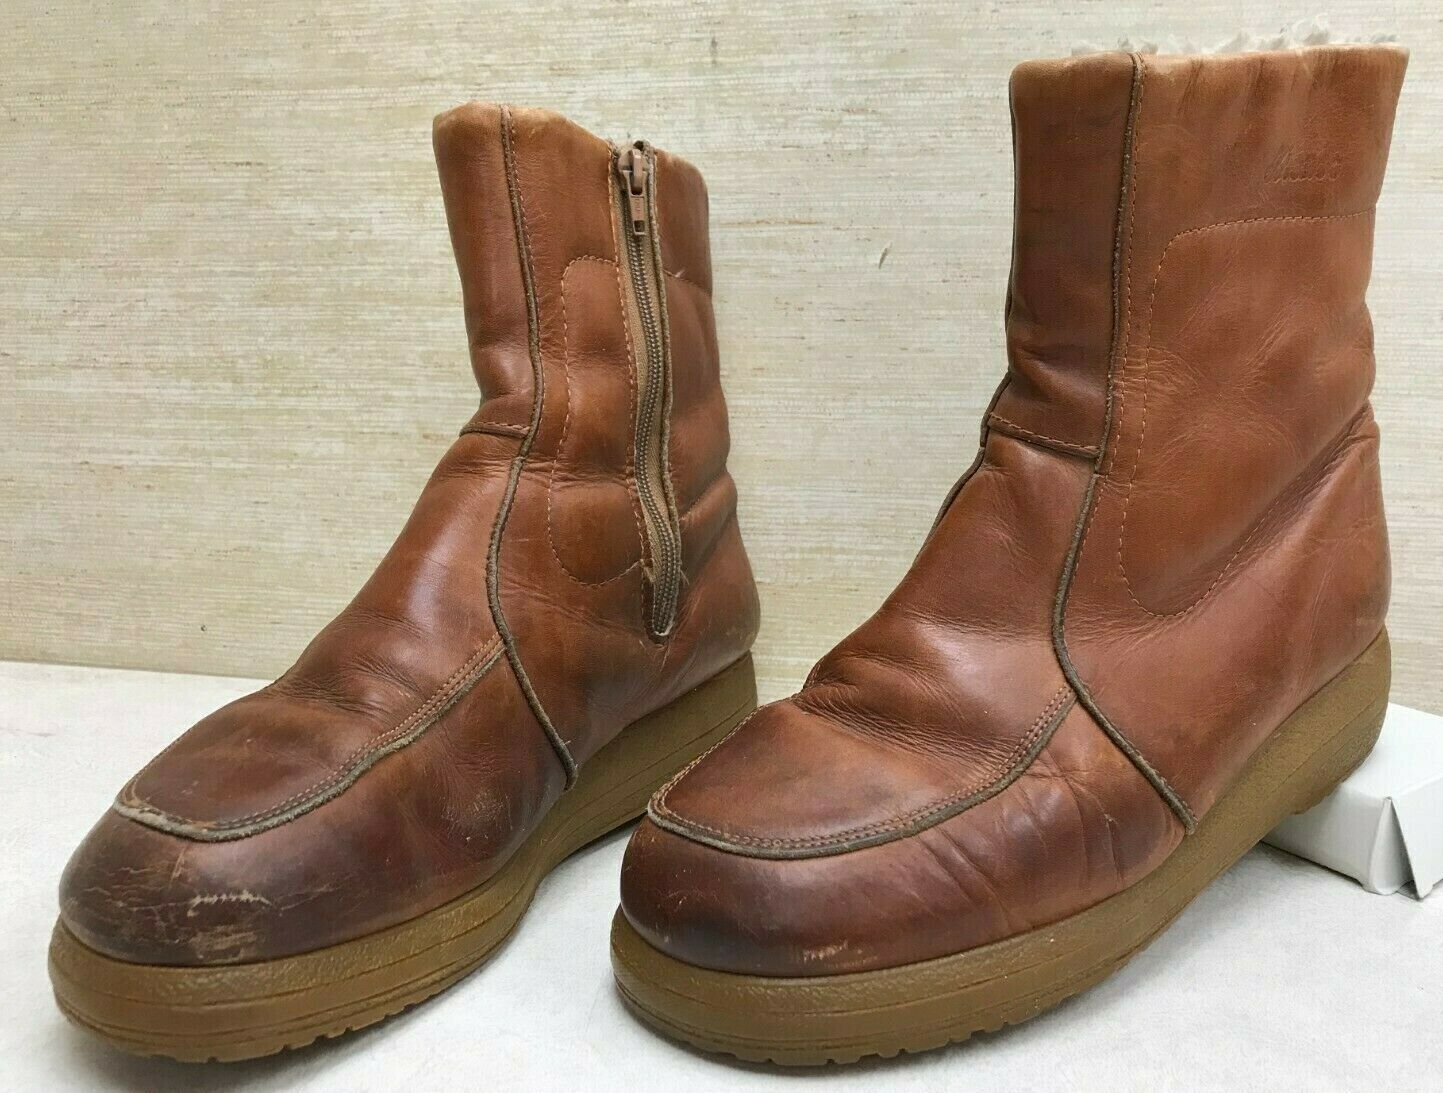 Blondo Mens Boots Leather Hike Sz 10 Vintage Canada Fleece Lined Winter Sherpa